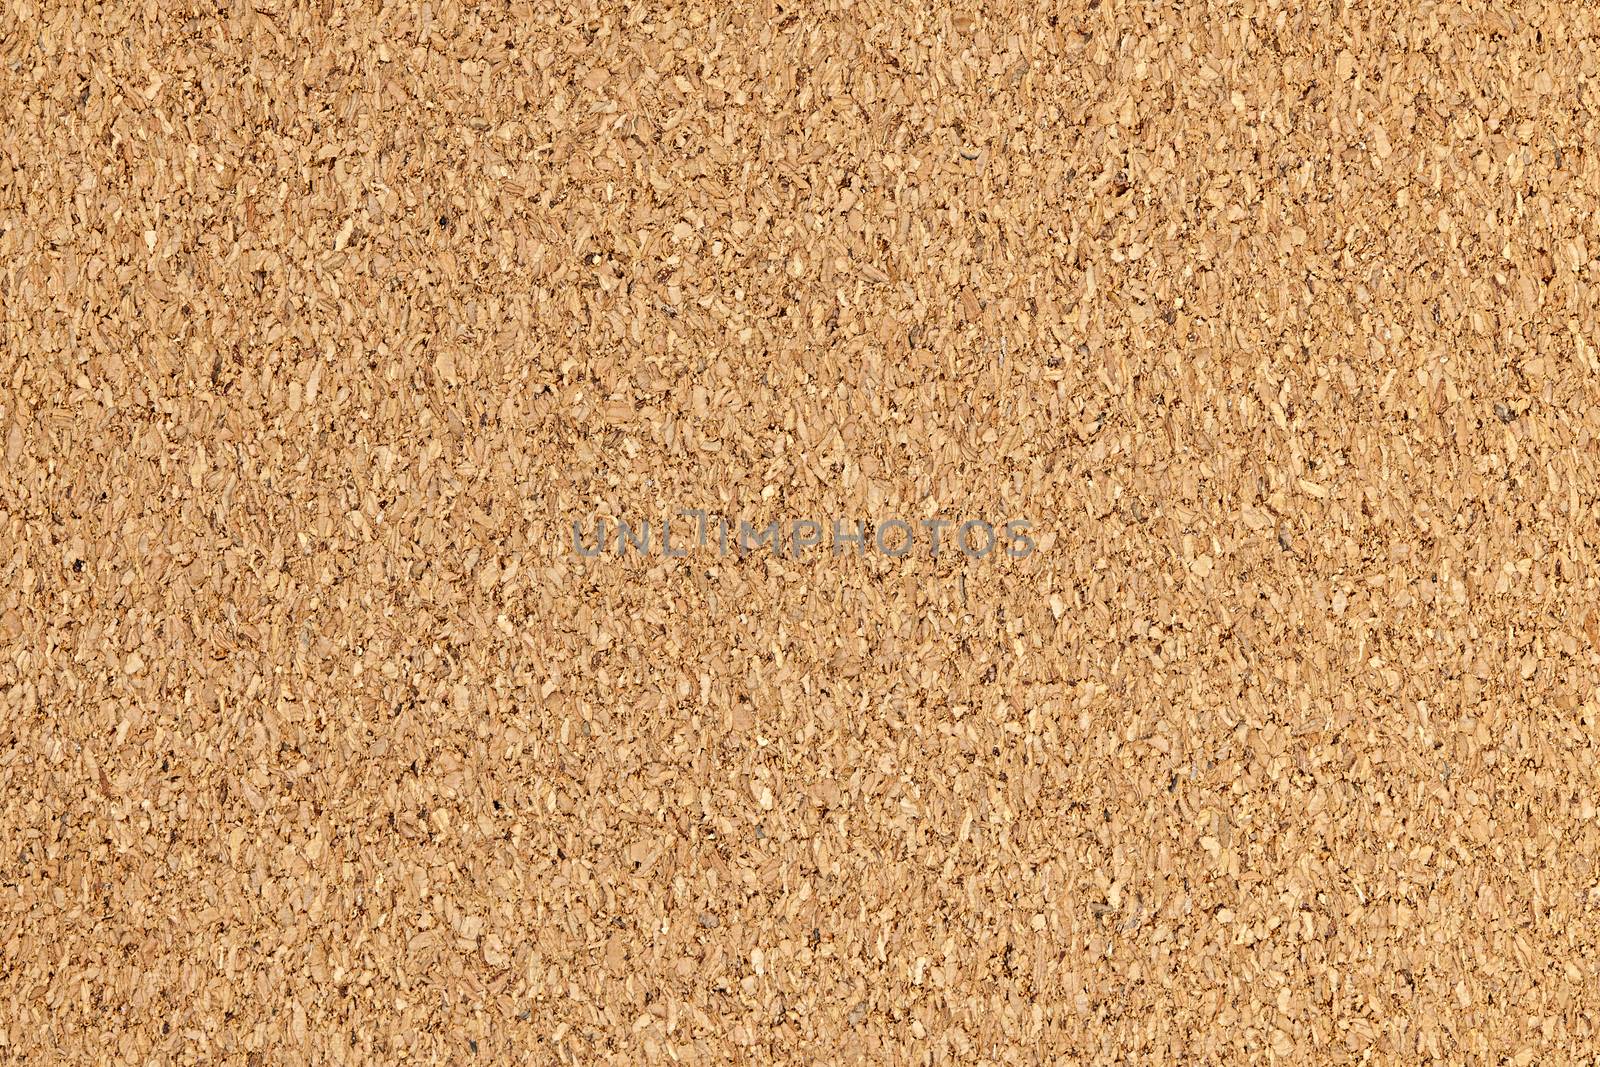 Brown cork board background surface with texture